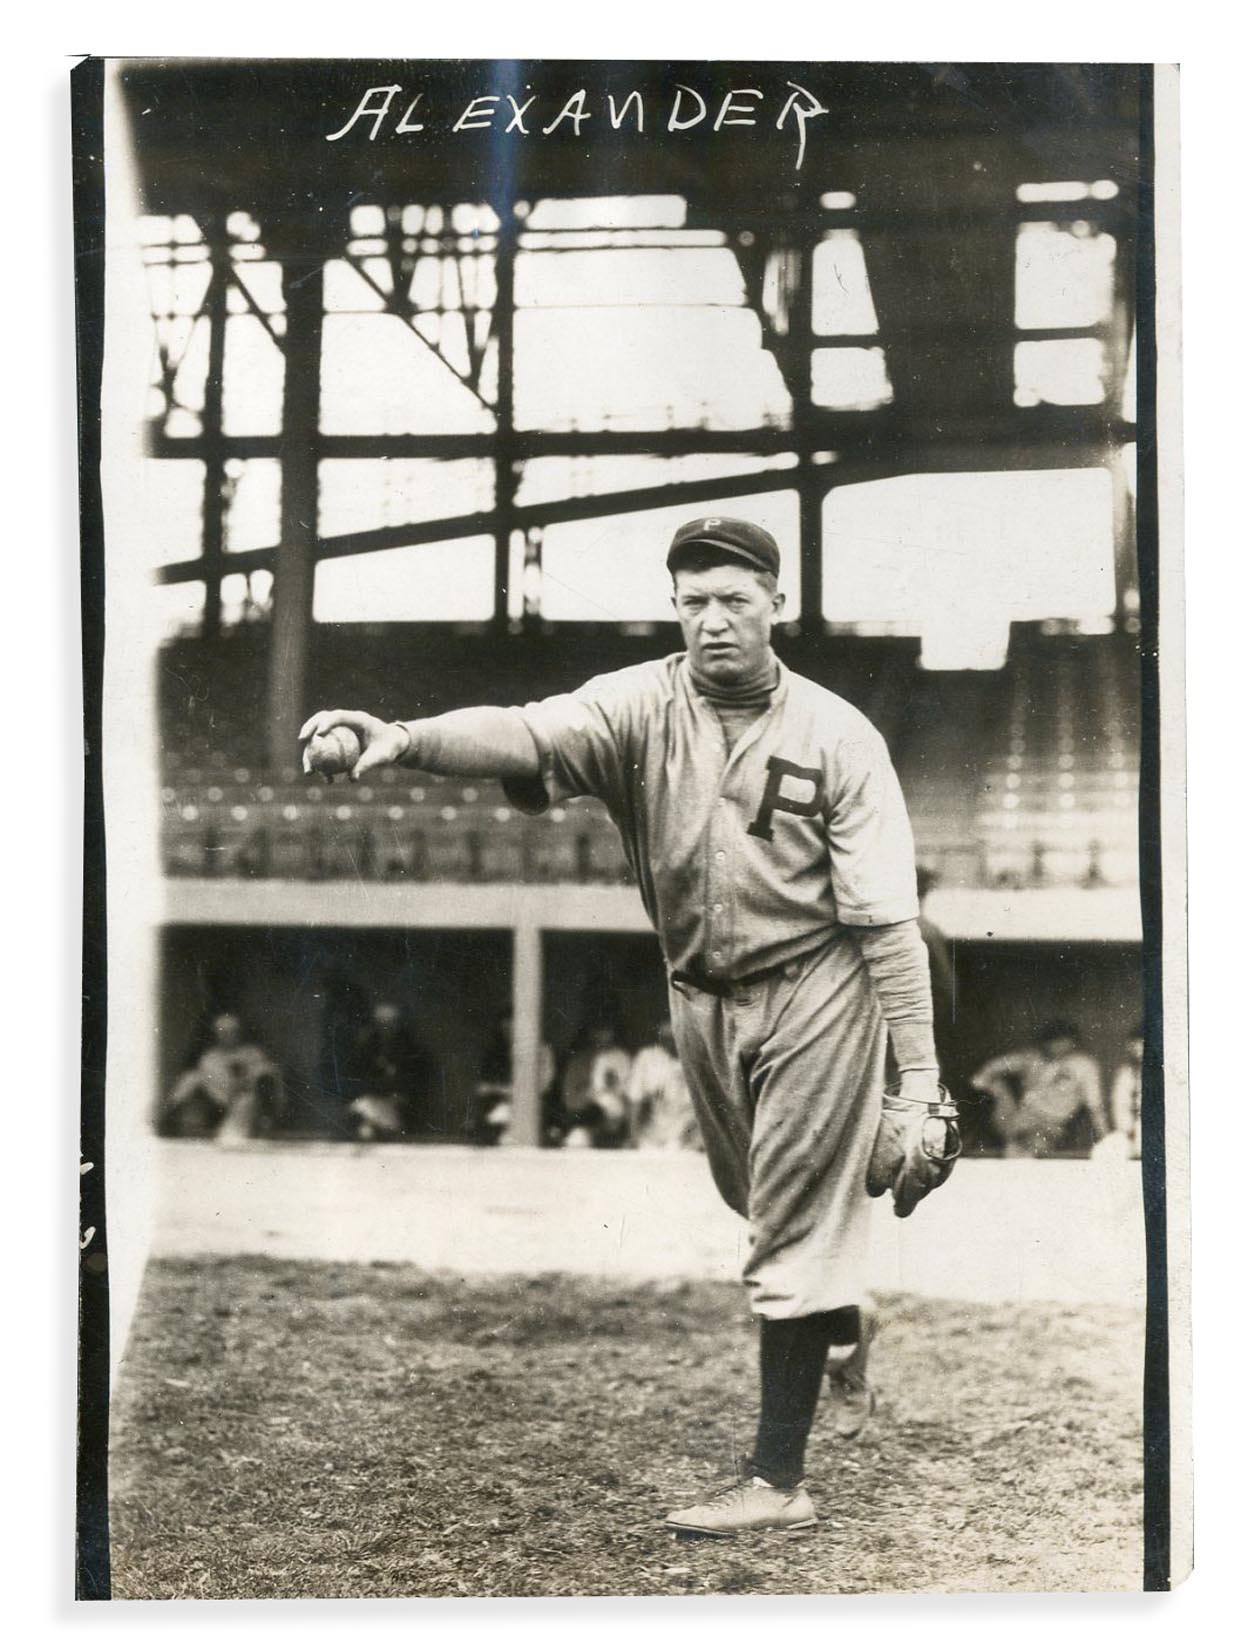 Vintage Sports Photographs - Incredible Grover Cleveland Alexander Photograph by Bain